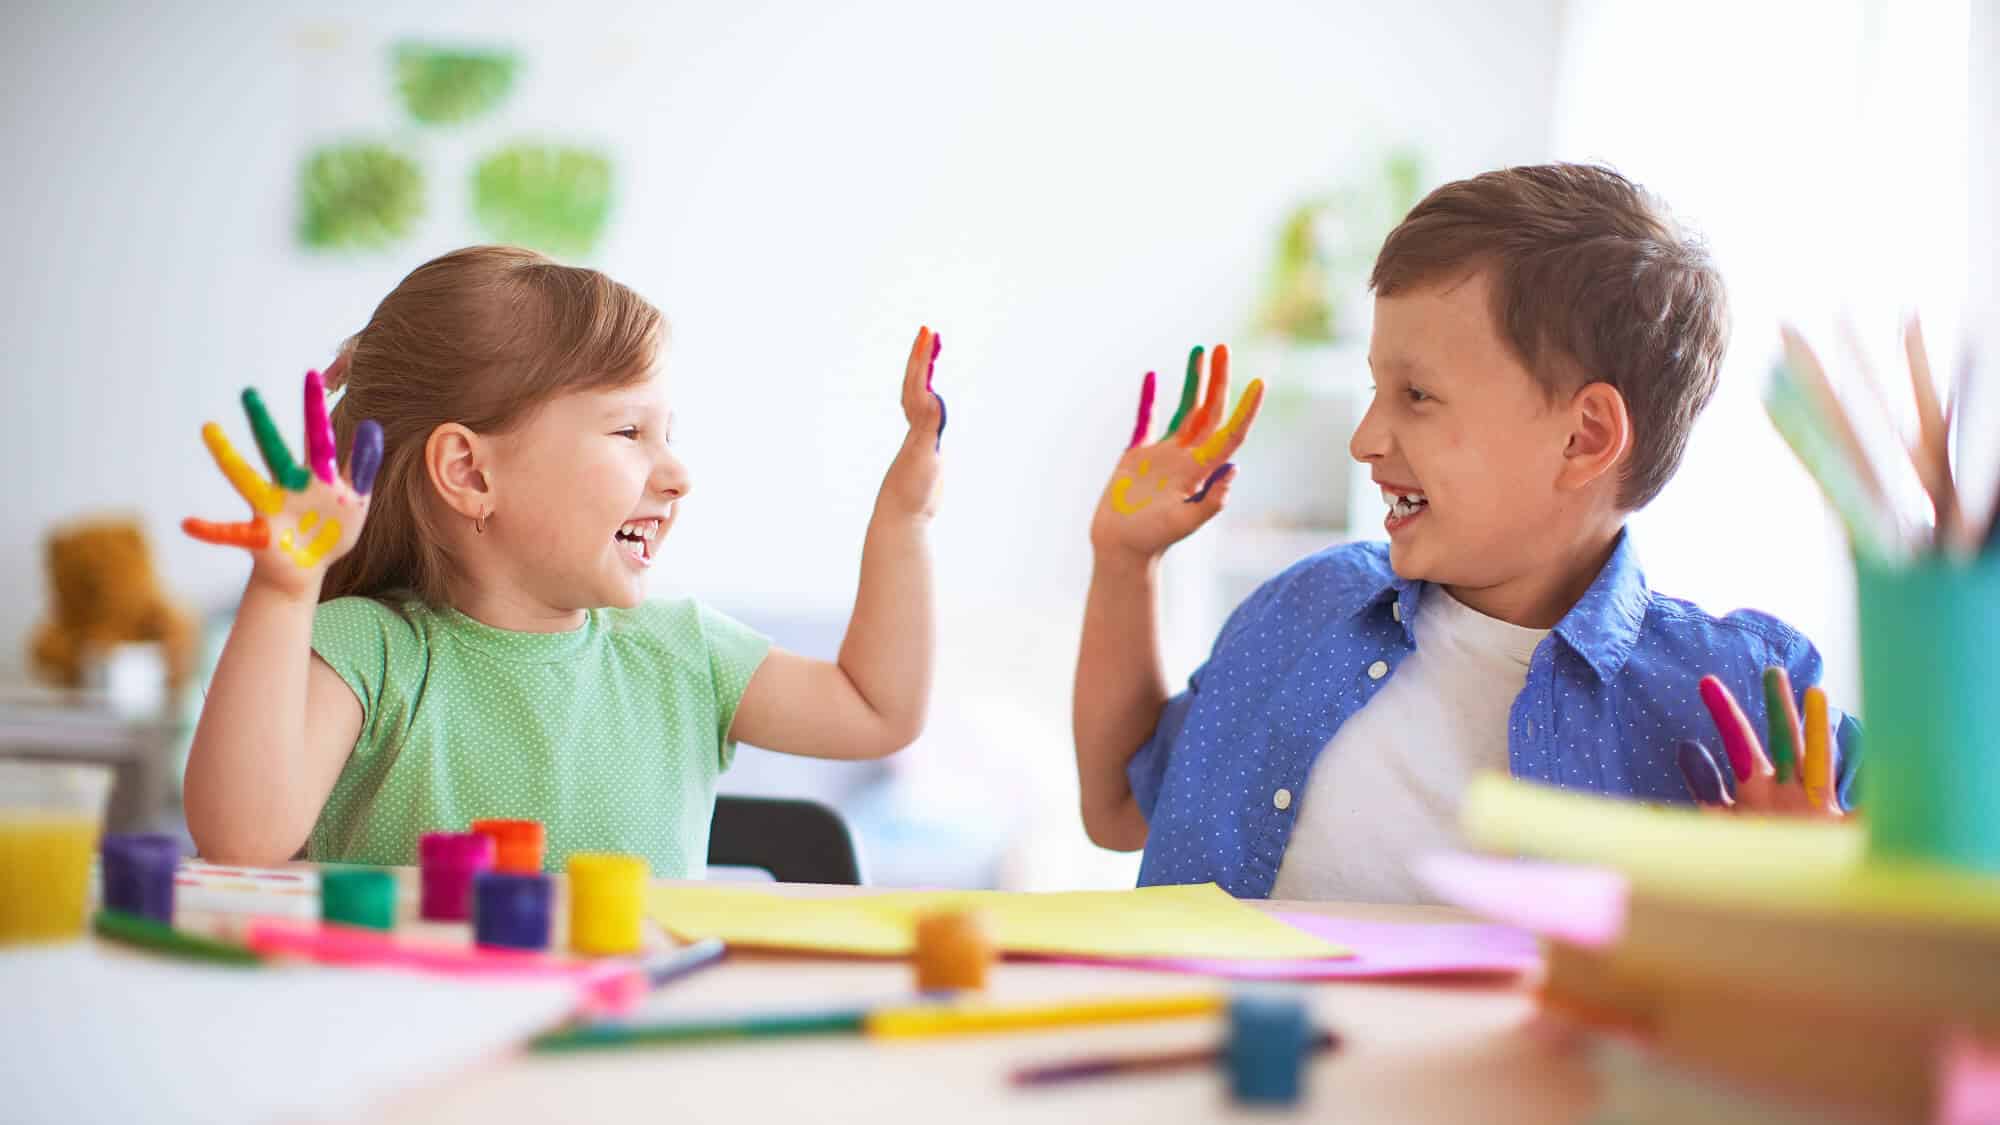 9 Epic Skills Kids Learn With Playtime (and how you can help)